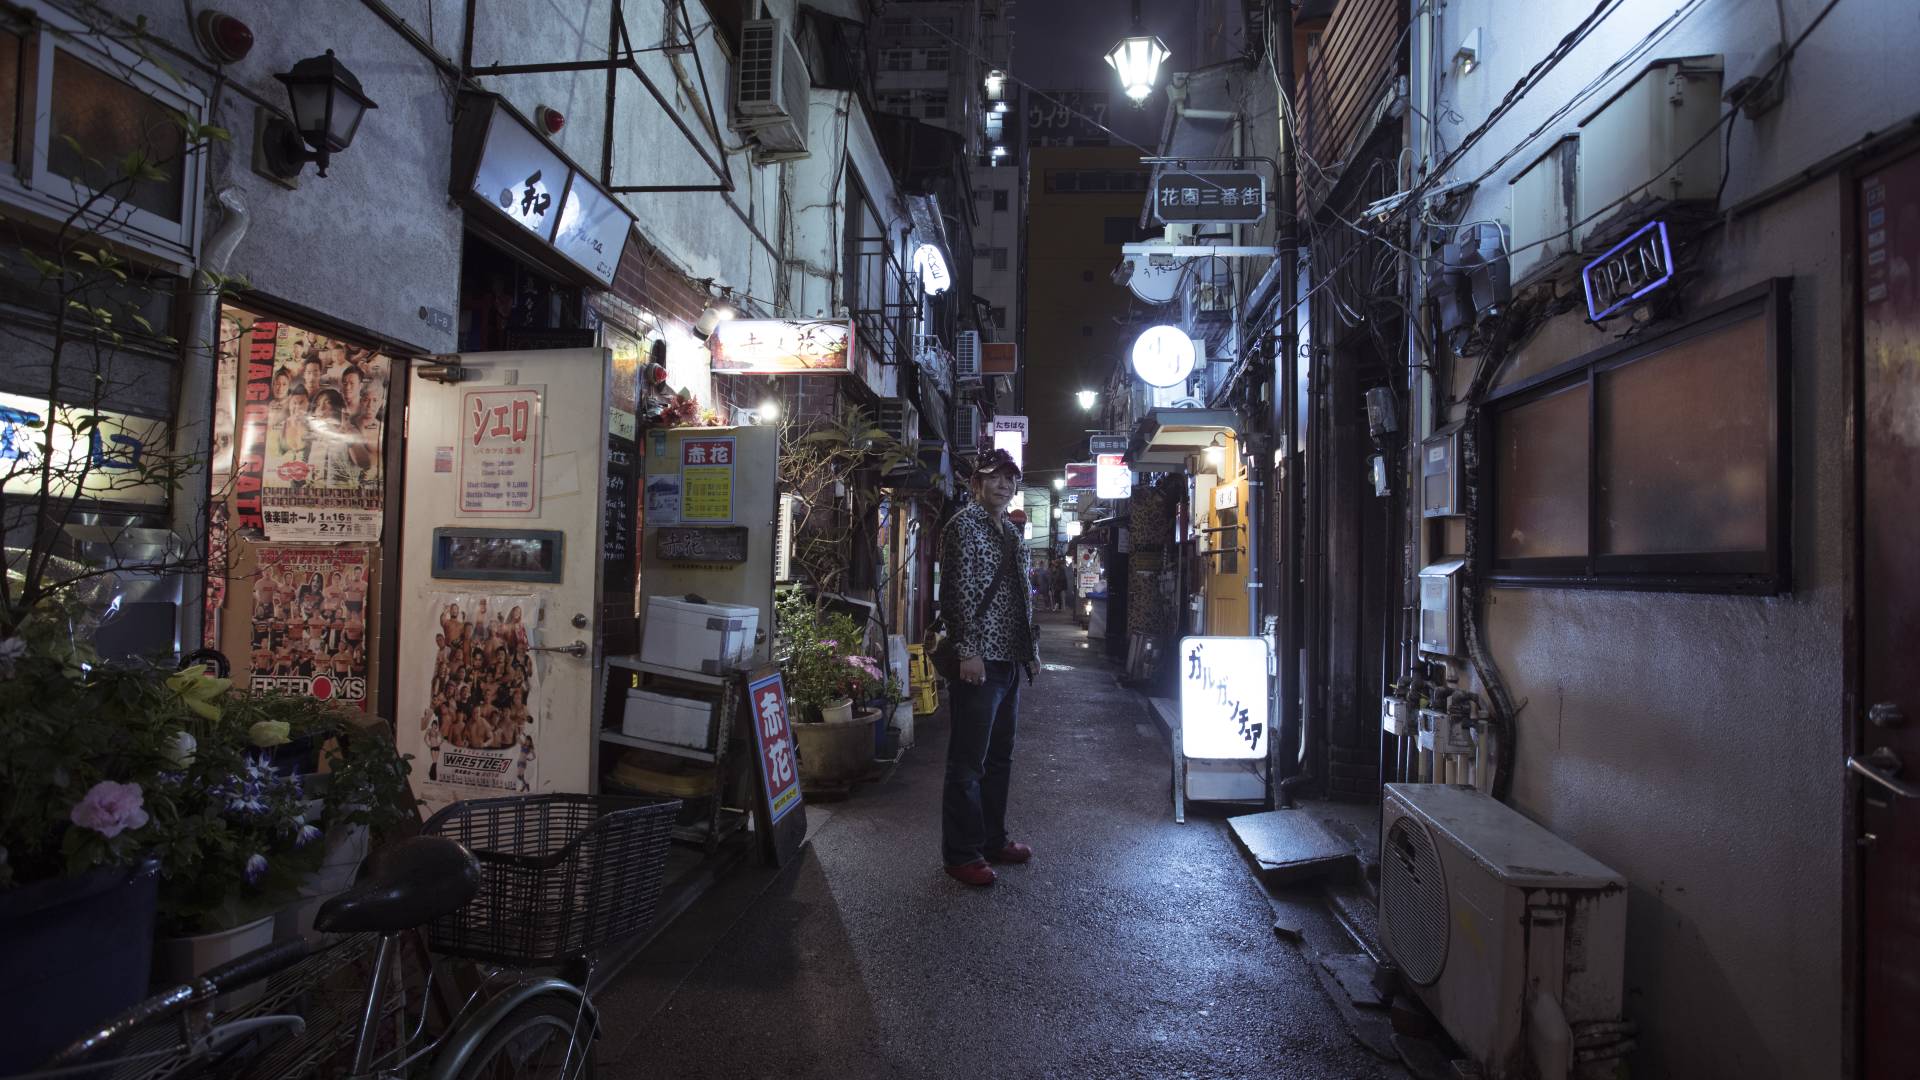 A restaurant owner from the Golden Gai shines a light on Shinjuk